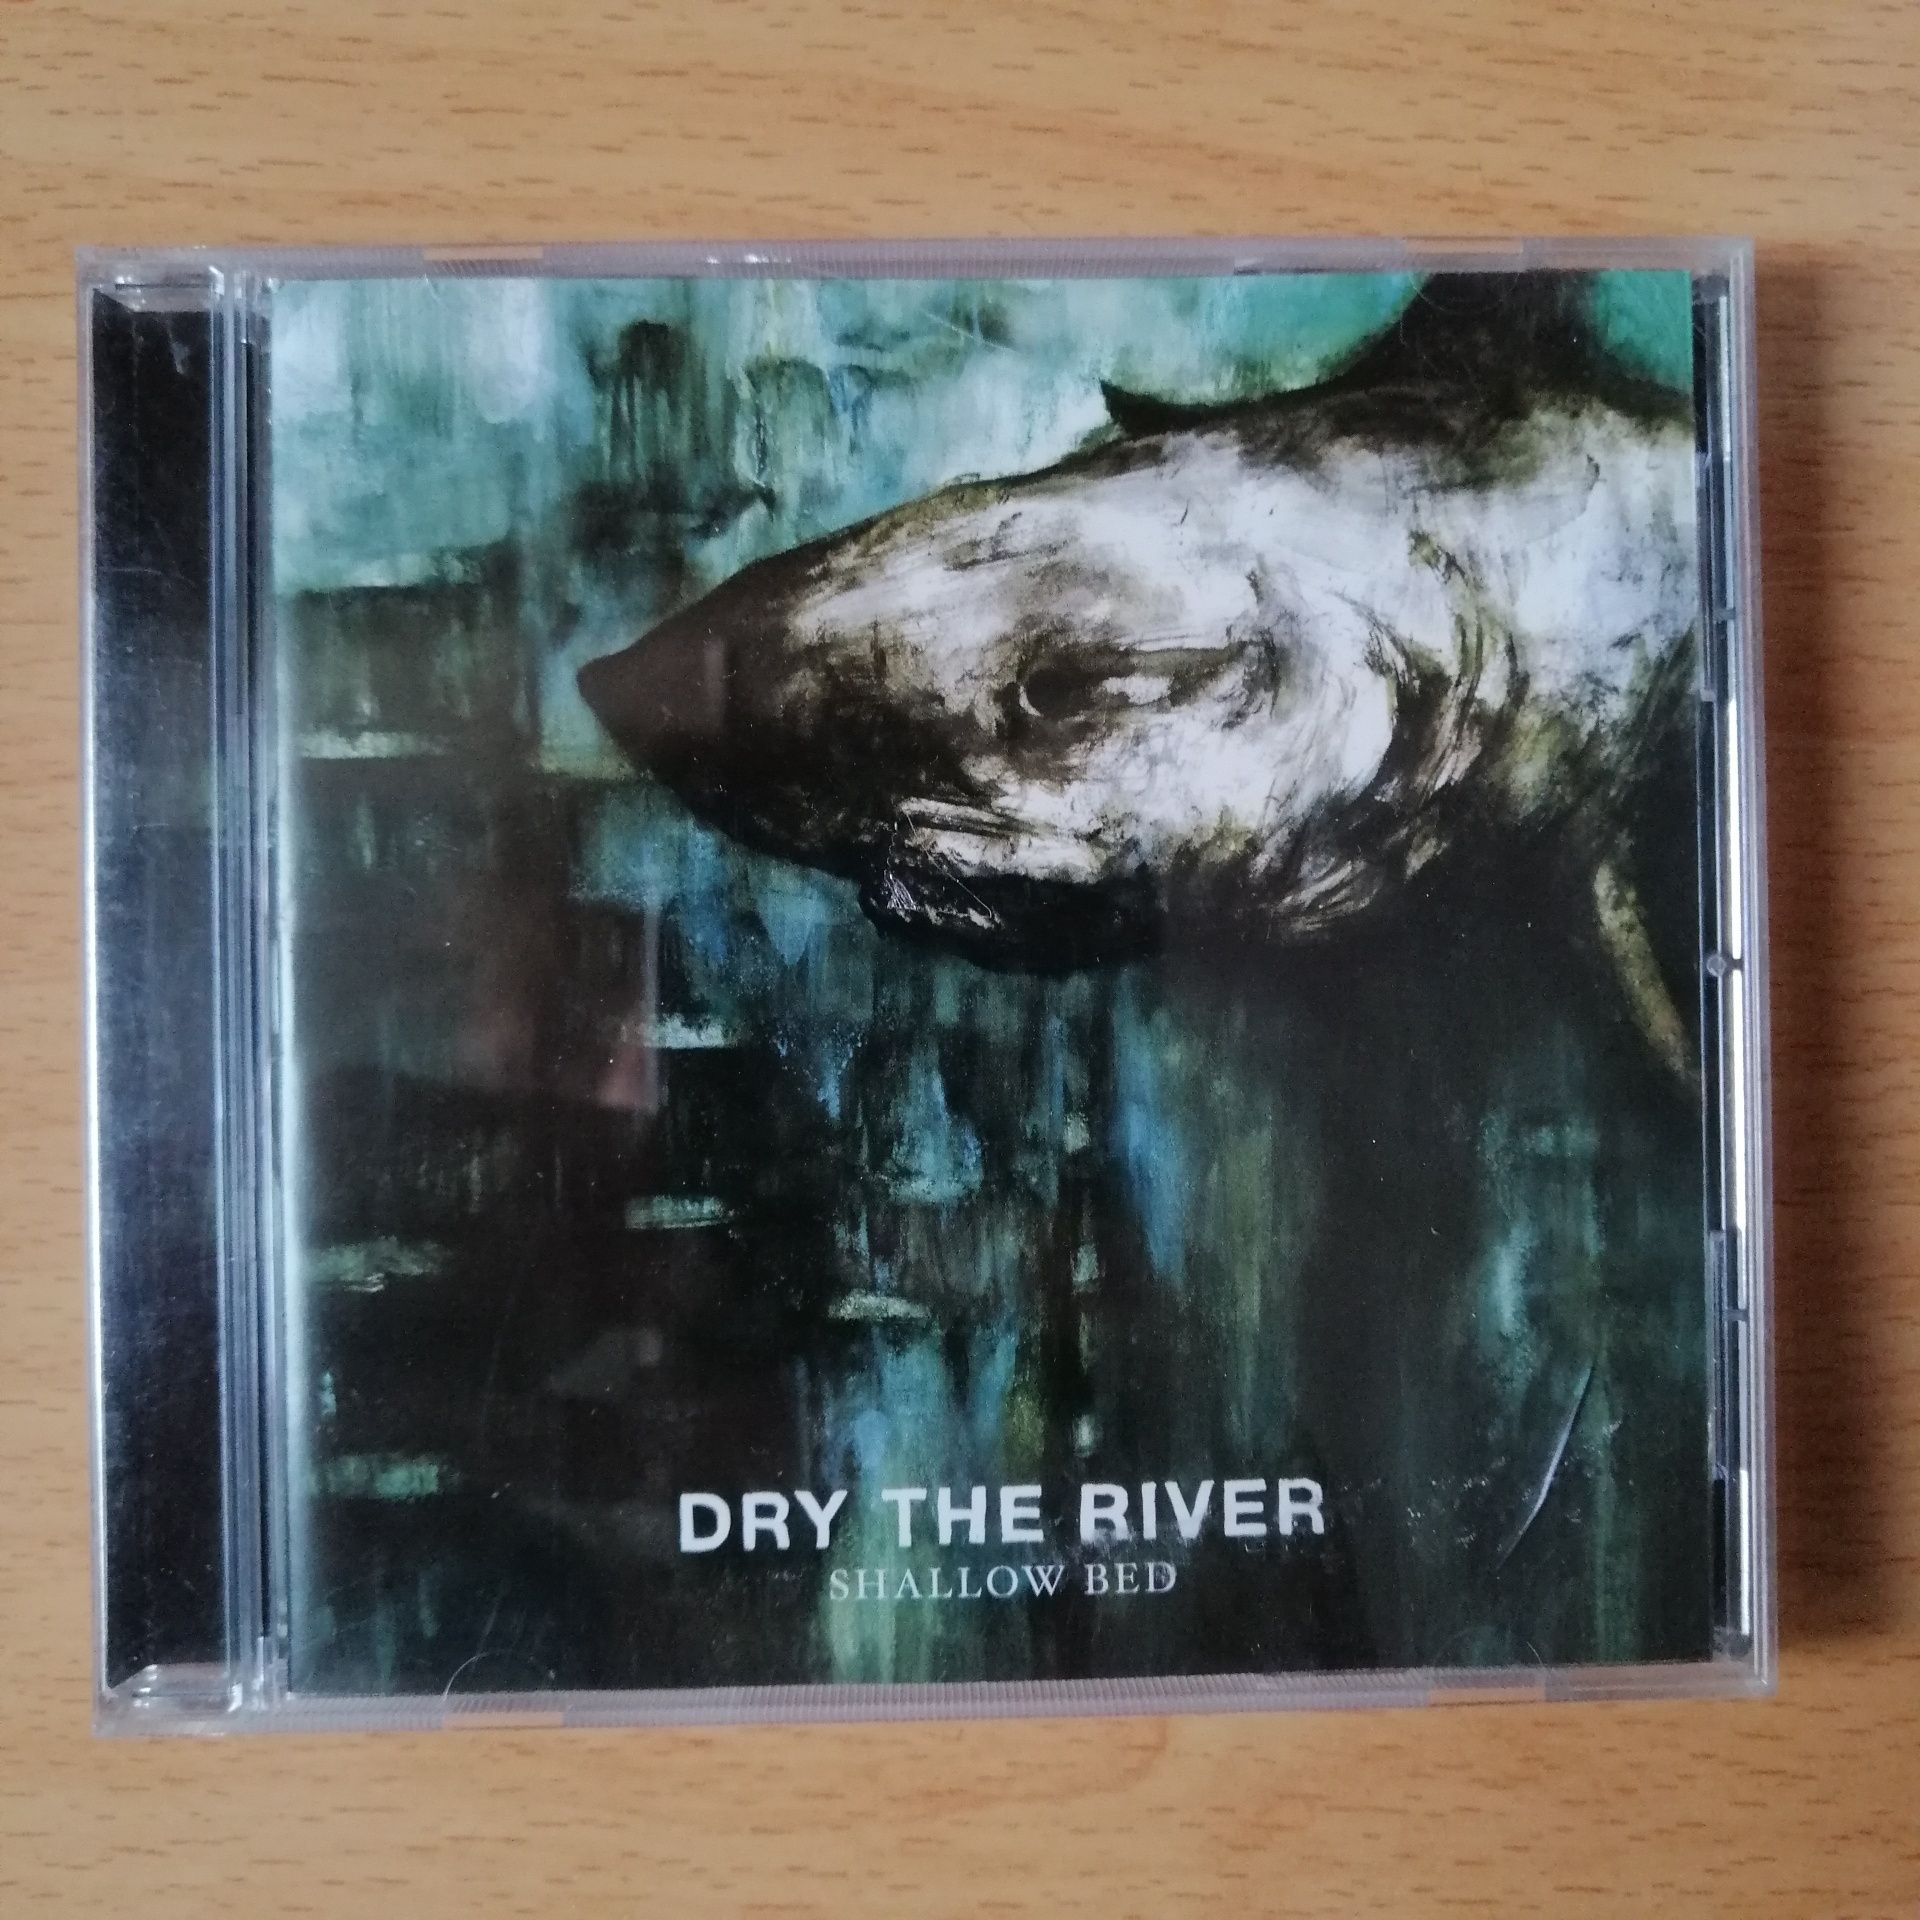 Dry The River "Shallow Bed" CD